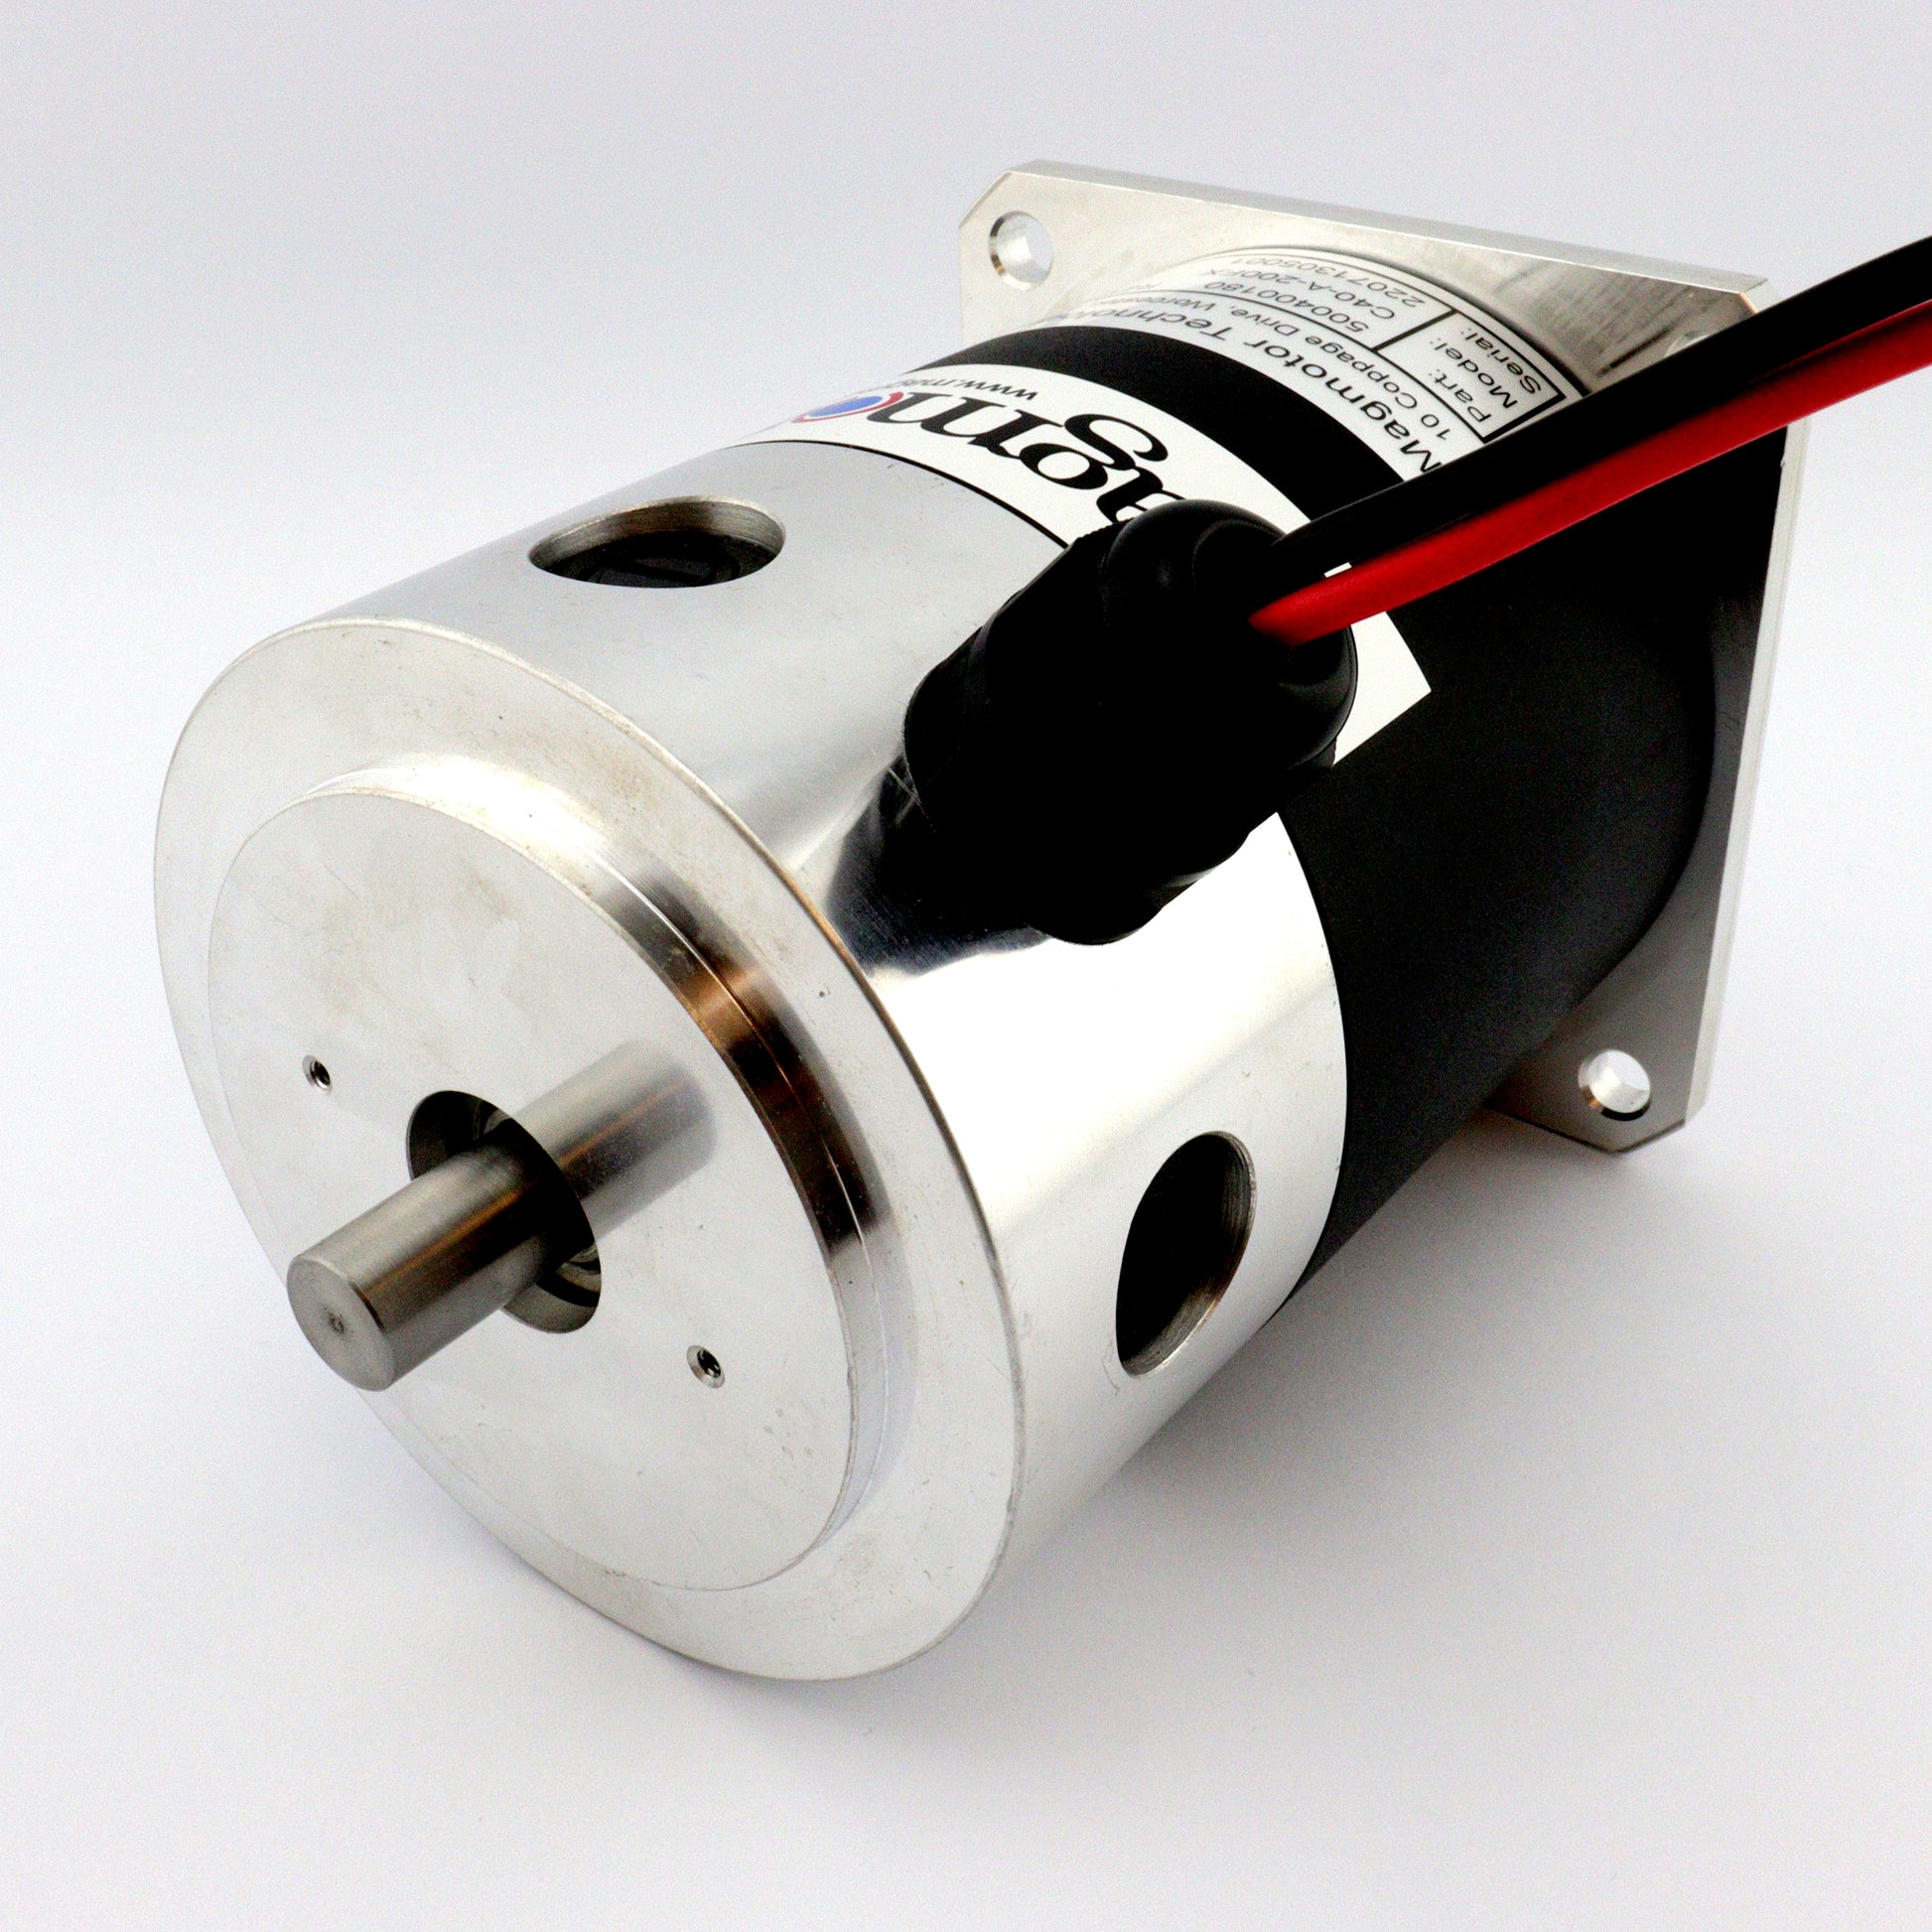 Magmotor C40-A-200FX Brushed Motor 500400180 Back View